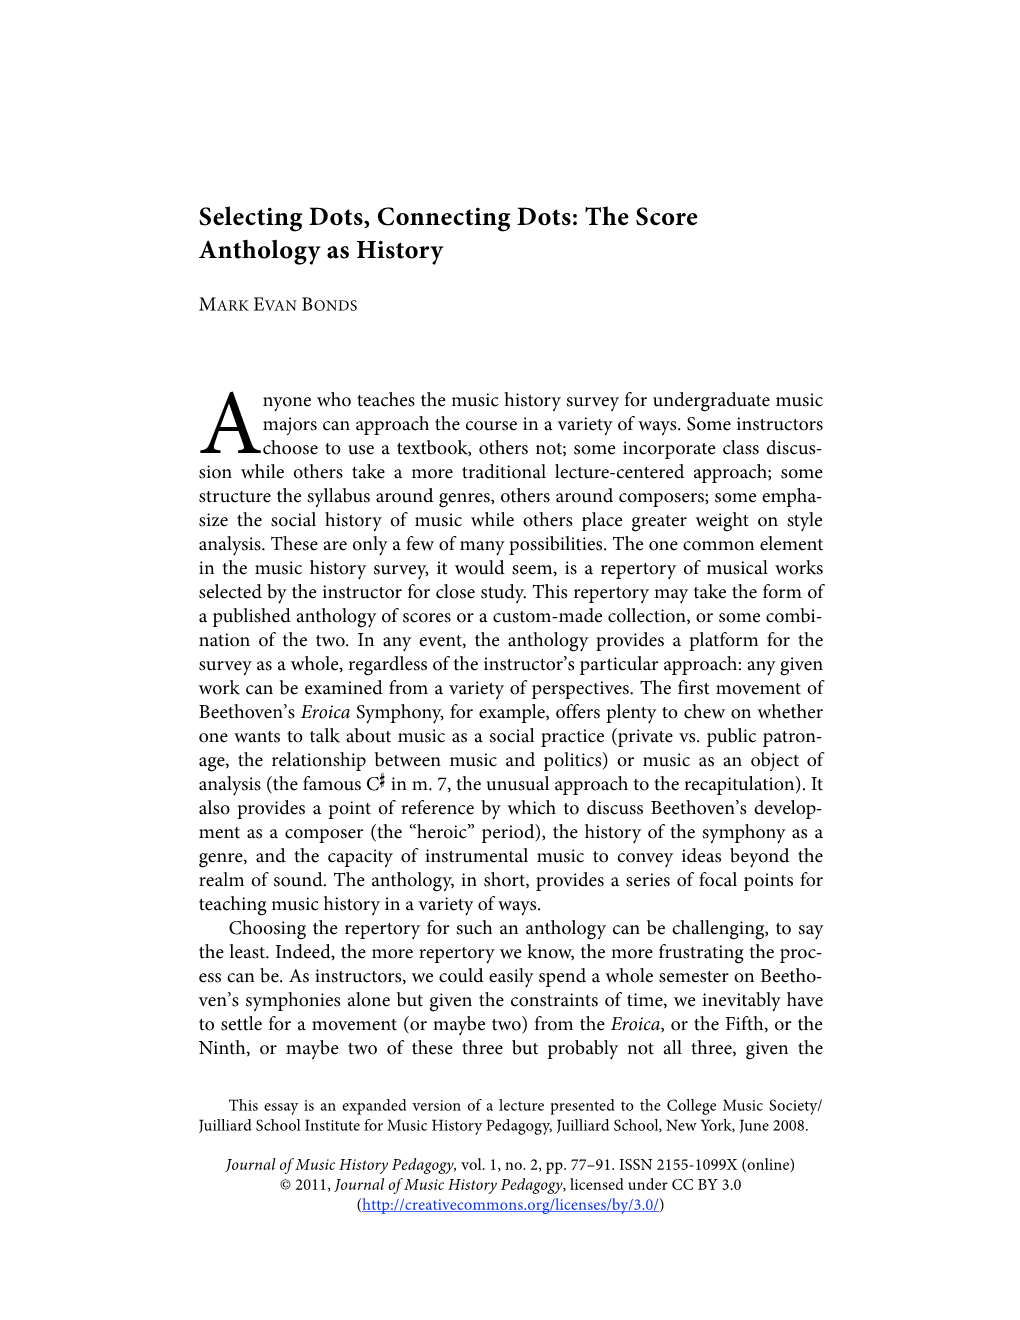 Selecting Dots, Connecting Dots: the Score Anthology As History